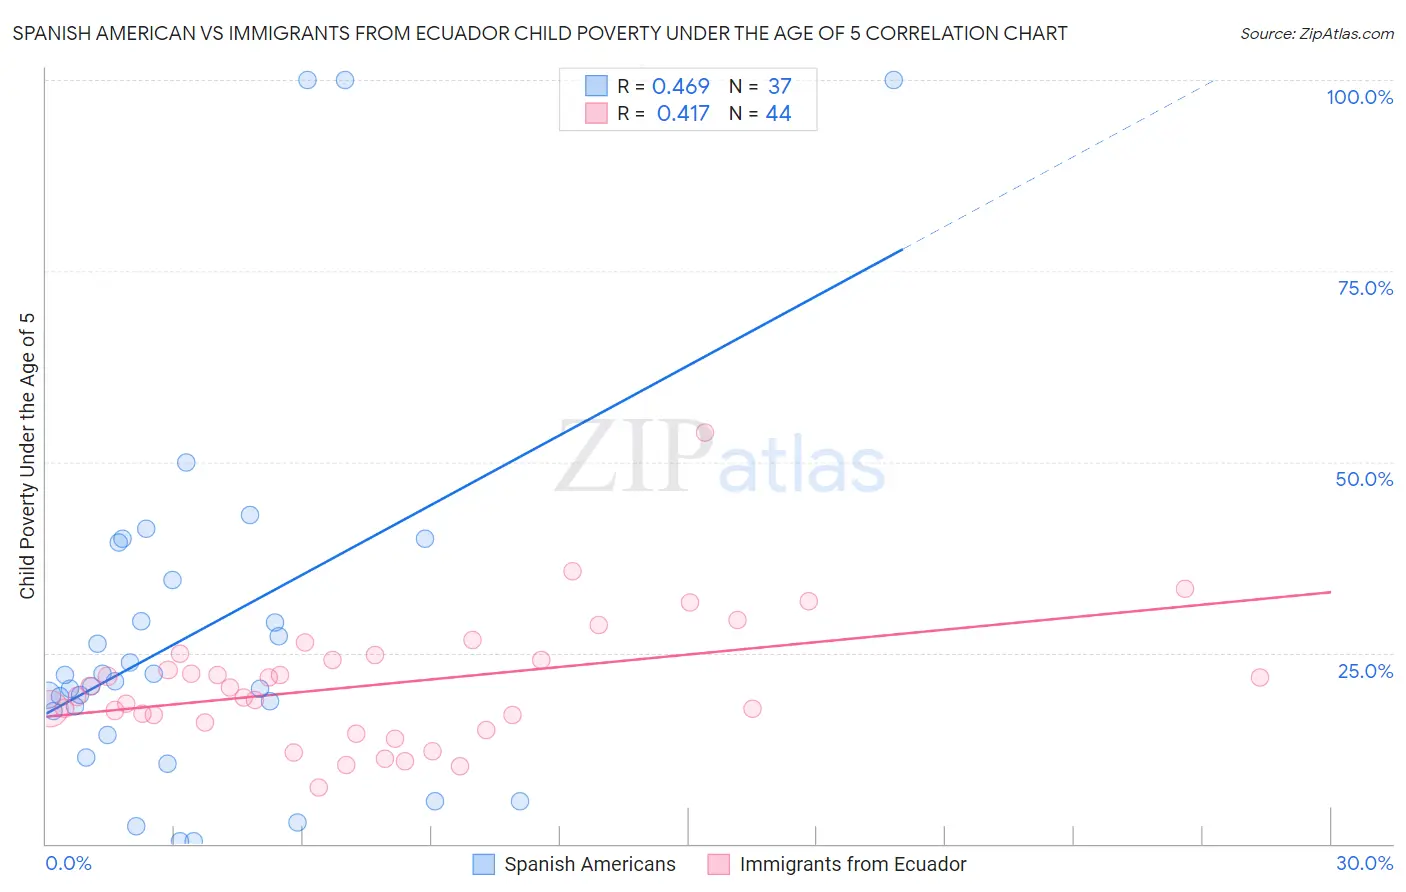 Spanish American vs Immigrants from Ecuador Child Poverty Under the Age of 5